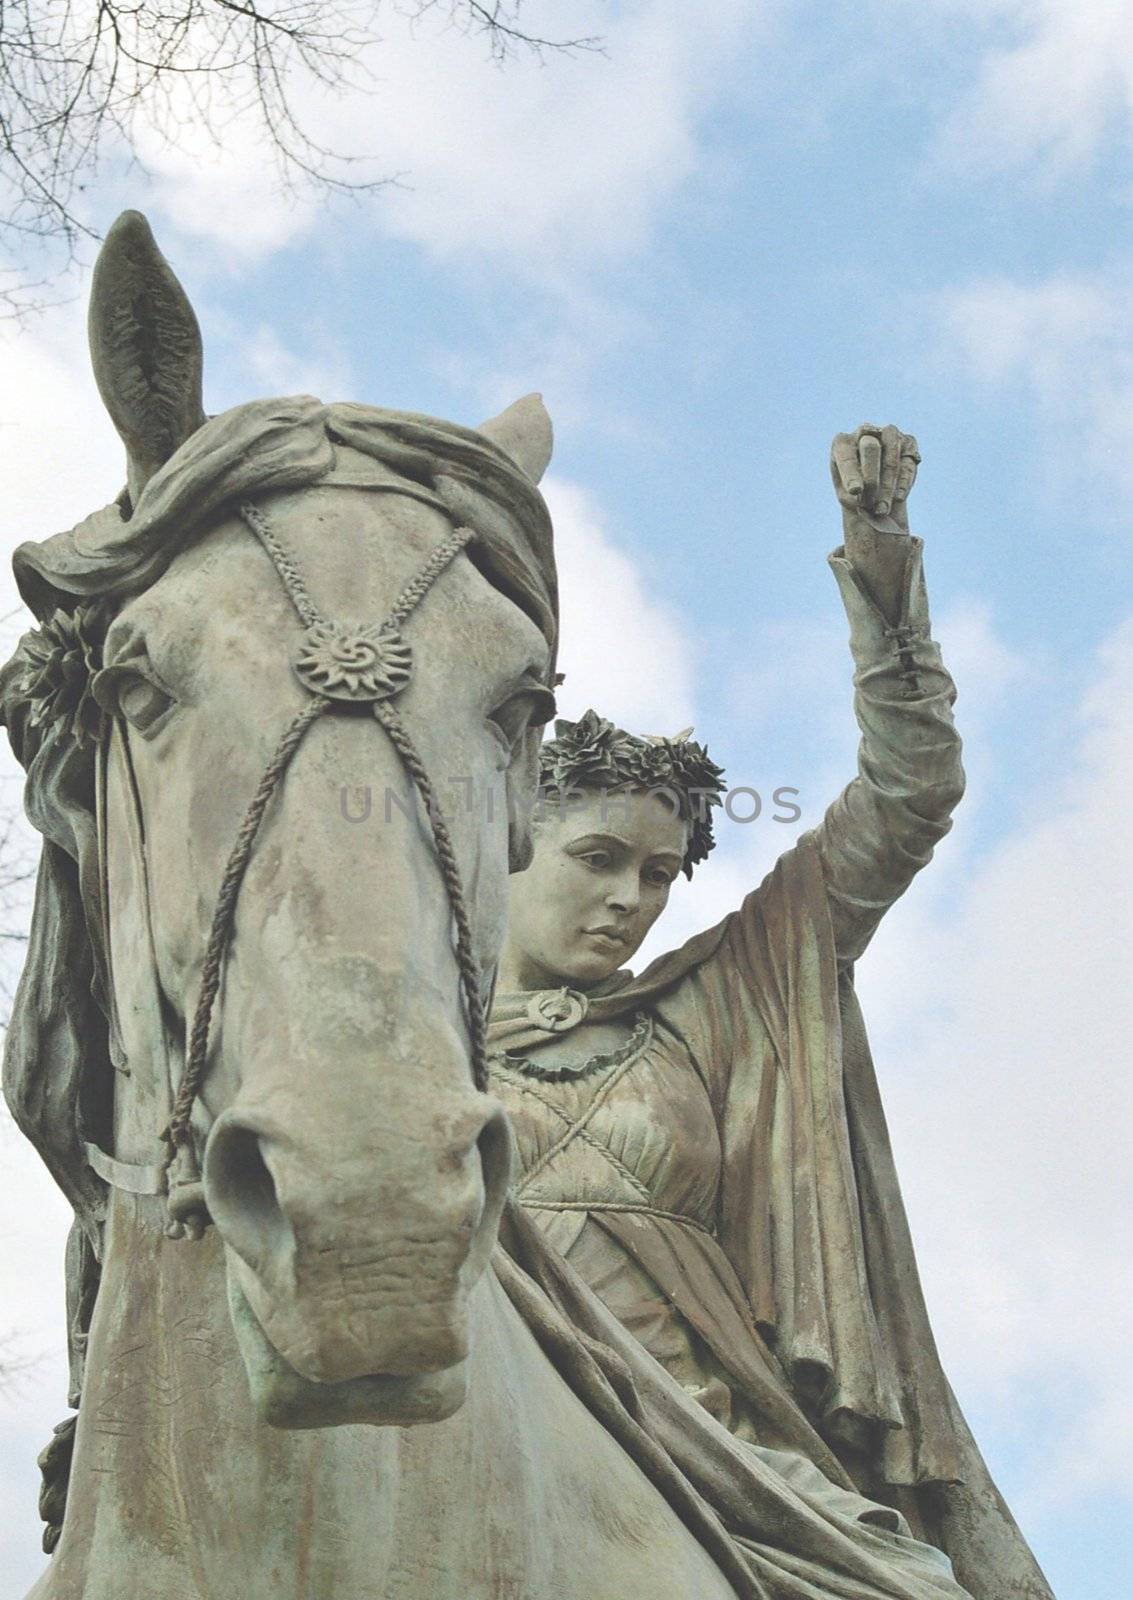 detail of statue in banbury, Northhamptonshire, england, illustrating a medieval poem